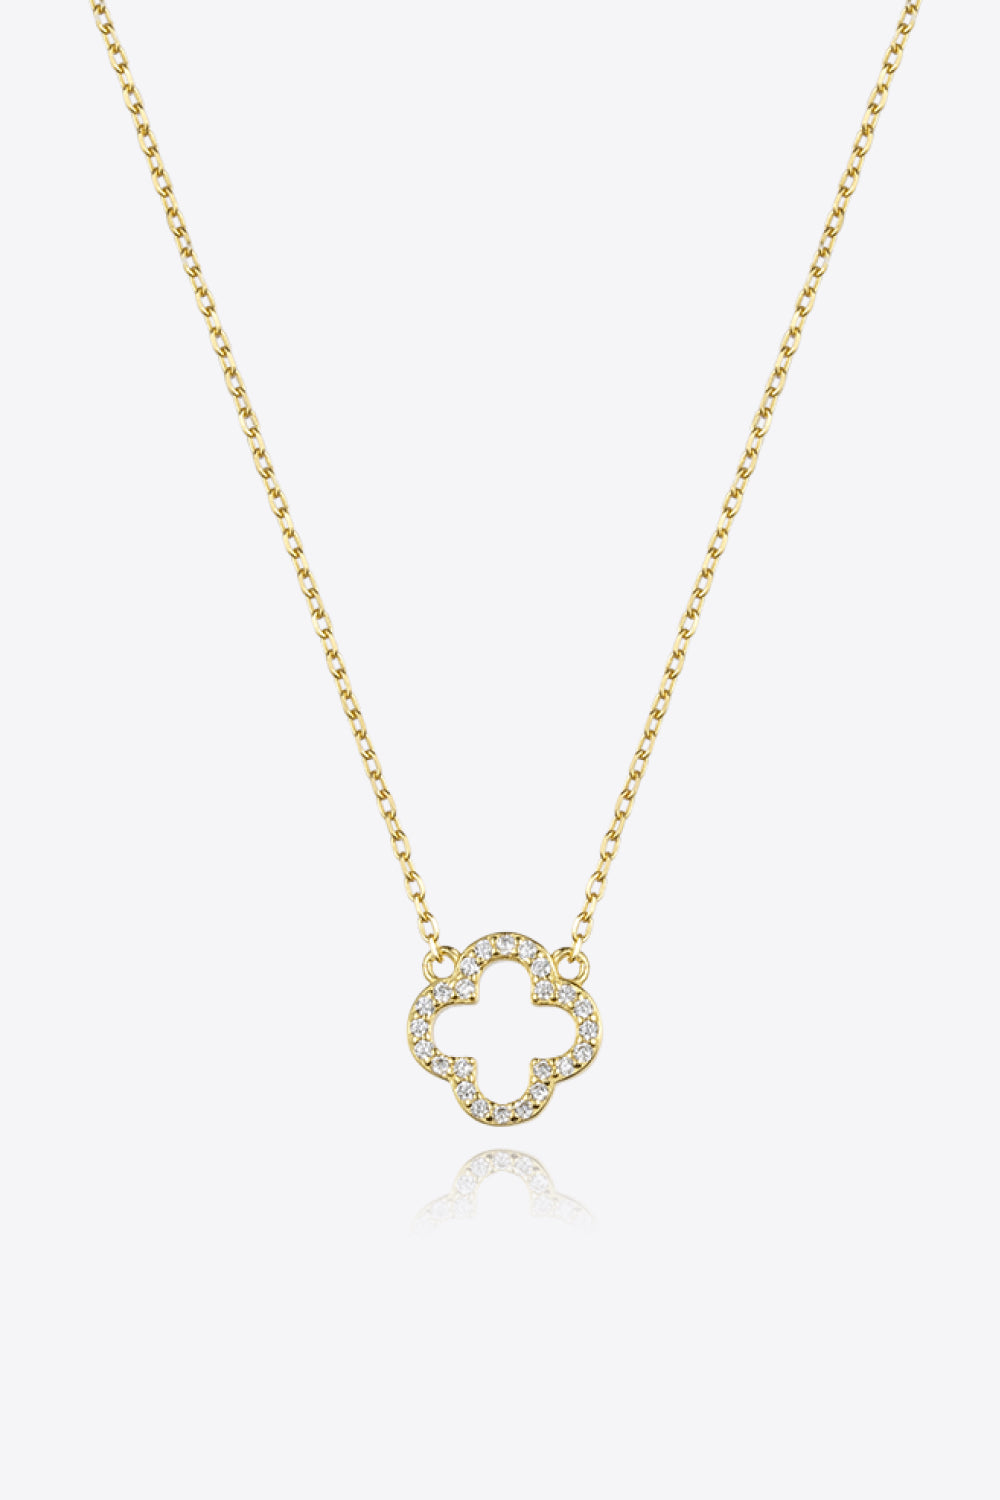 GOLD ONE SIZE Inlaid Cubic Zirconia 925 Sterling Silver Necklace - 2 options - necklace at TFC&H Co.